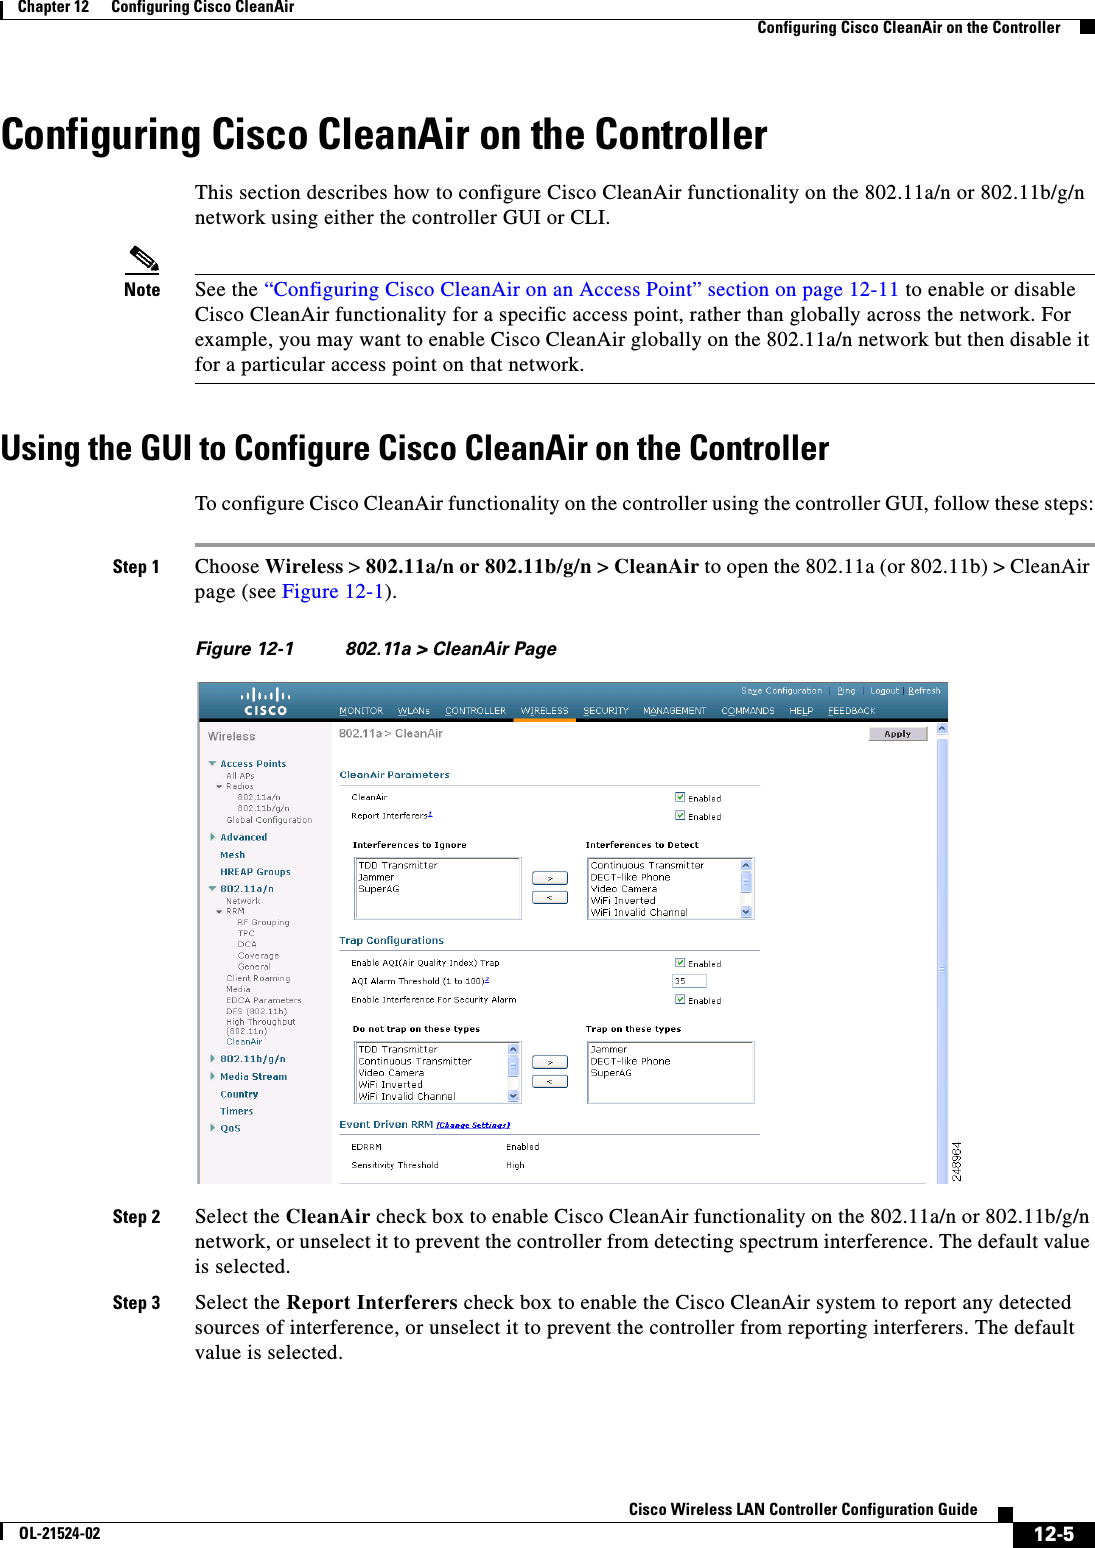  12-5Cisco Wireless LAN Controller Configuration GuideOL-21524-02Chapter 12      Configuring Cisco CleanAirConfiguring Cisco CleanAir on the ControllerConfiguring Cisco CleanAir on the ControllerThis section describes how to configure Cisco CleanAir functionality on the 802.11a/n or 802.11b/g/n network using either the controller GUI or CLI.Note See the “Configuring Cisco CleanAir on an Access Point” section on page 12-11 to enable or disable Cisco CleanAir functionality for a specific access point, rather than globally across the network. For example, you may want to enable Cisco CleanAir globally on the 802.11a/n network but then disable it for a particular access point on that network.Using the GUI to Configure Cisco CleanAir on the ControllerTo configure Cisco CleanAir functionality on the controller using the controller GUI, follow these steps:Step 1 Choose Wireless &gt; 802.11a/n or 802.11b/g/n &gt; CleanAir to open the 802.11a (or 802.11b) &gt; CleanAir page (see Figure 12-1). Figure 12-1 802.11a &gt; CleanAir PageStep 2 Select the CleanAir check box to enable Cisco CleanAir functionality on the 802.11a/n or 802.11b/g/n network, or unselect it to prevent the controller from detecting spectrum interference. The default value is selected.Step 3 Select the Report Interferers check box to enable the Cisco CleanAir system to report any detected sources of interference, or unselect it to prevent the controller from reporting interferers. The default value is selected.